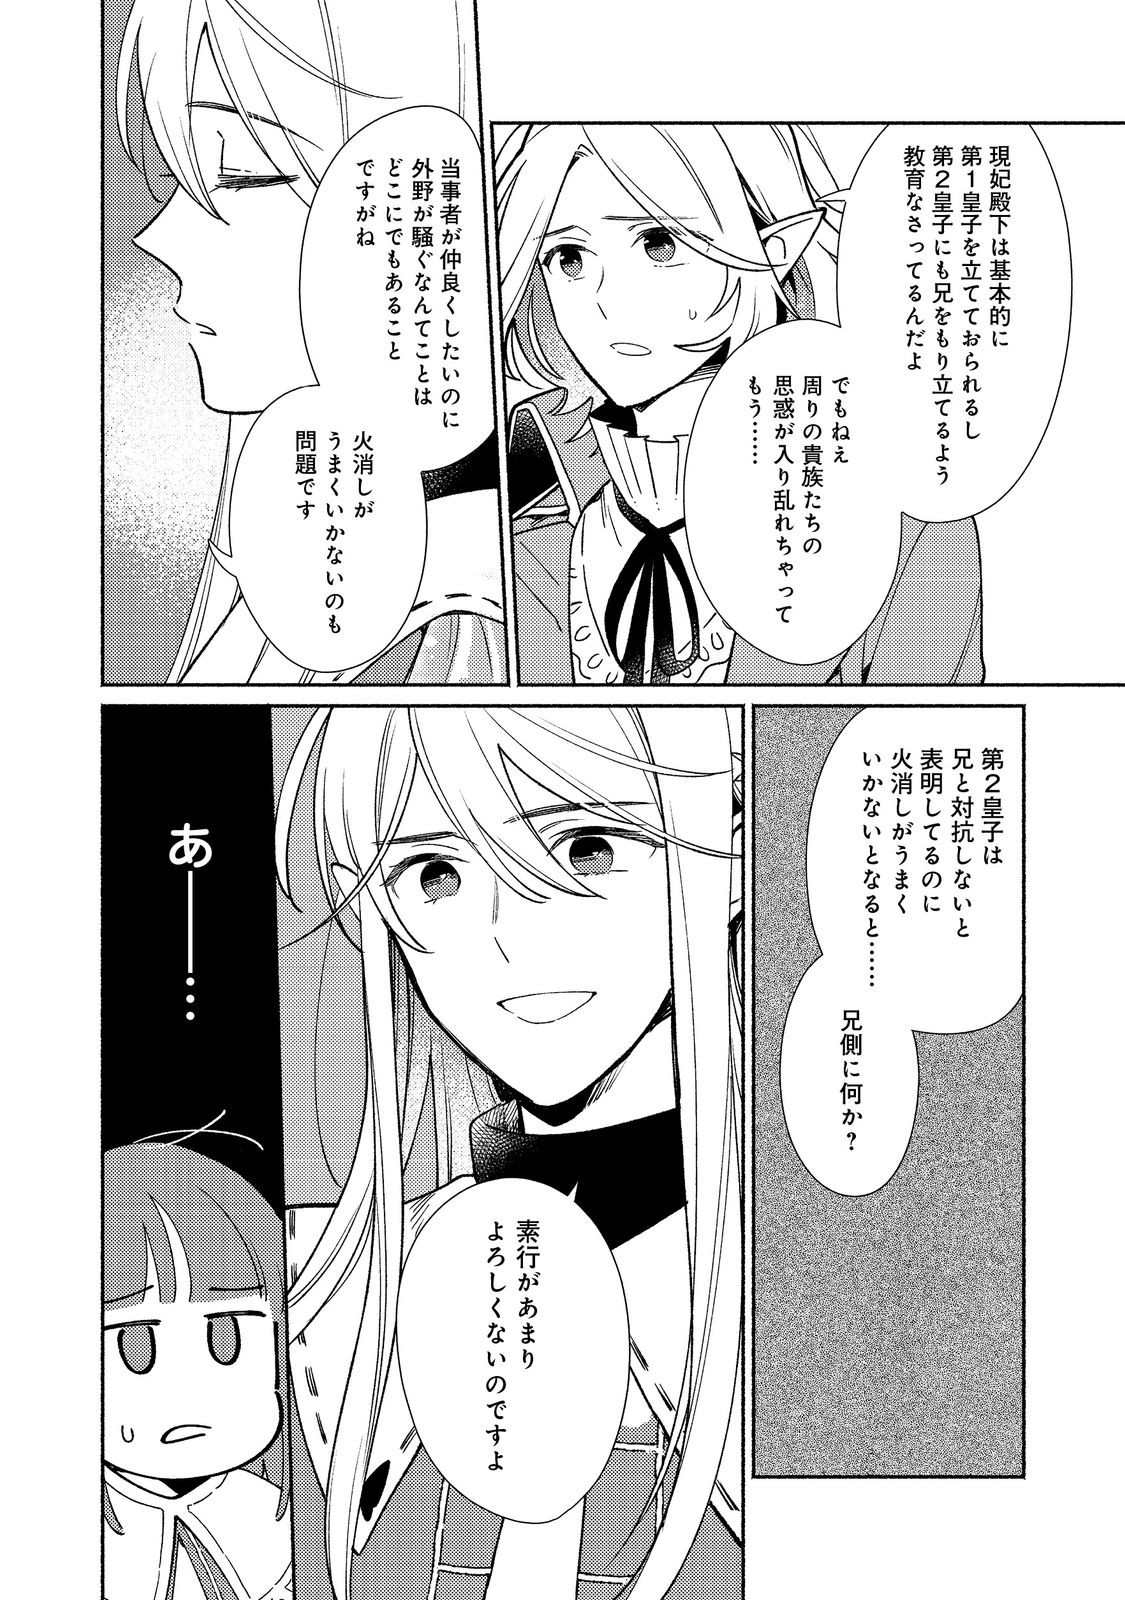 I’m the White Pig Nobleman 第23.1話 - Page 6